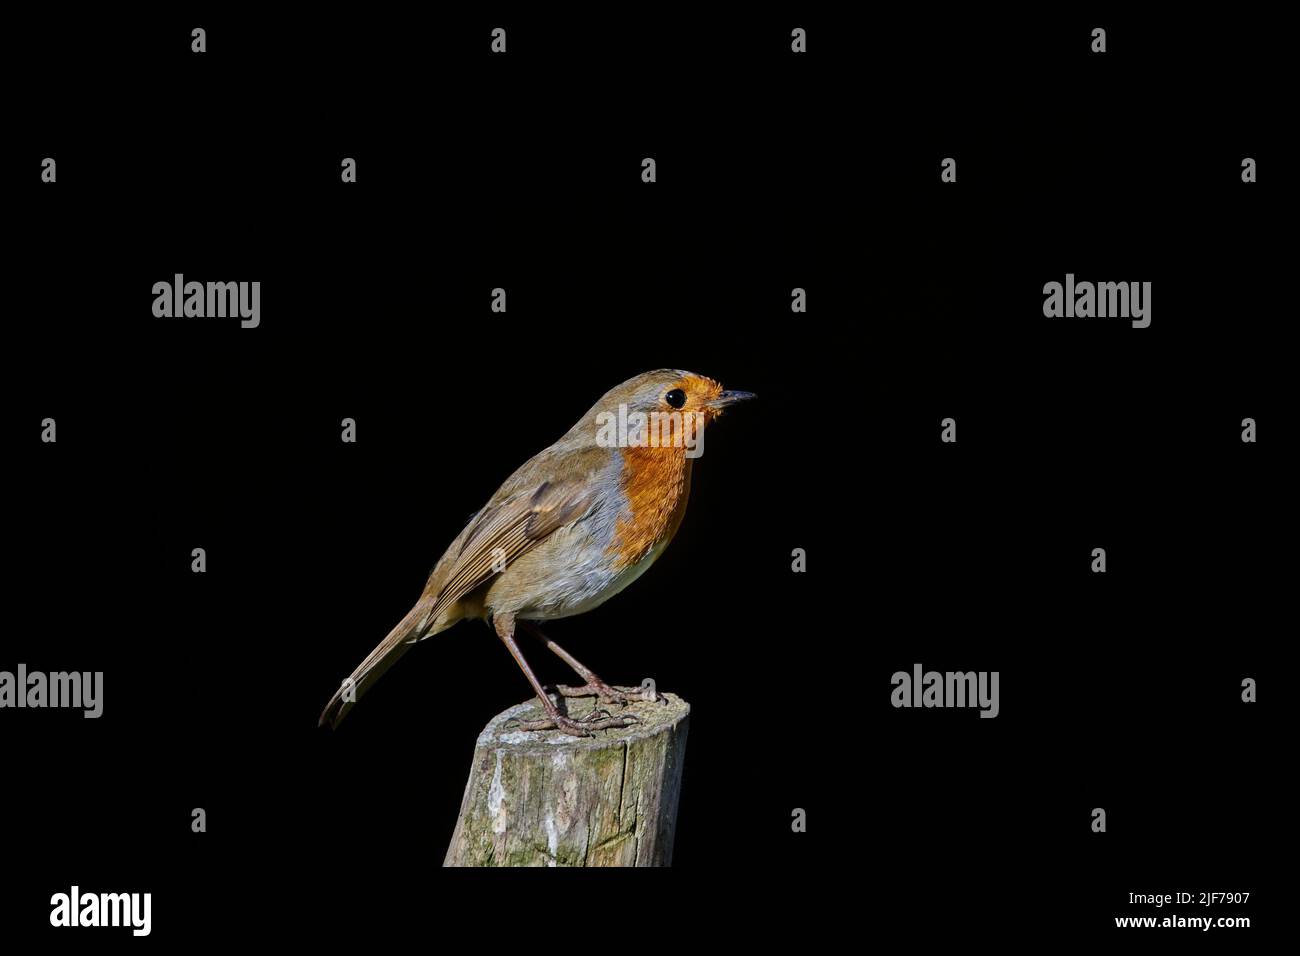 A side view of a Robin (Erithacus Rubecula) on its own looking to the right with a solid black background behind Stock Photo